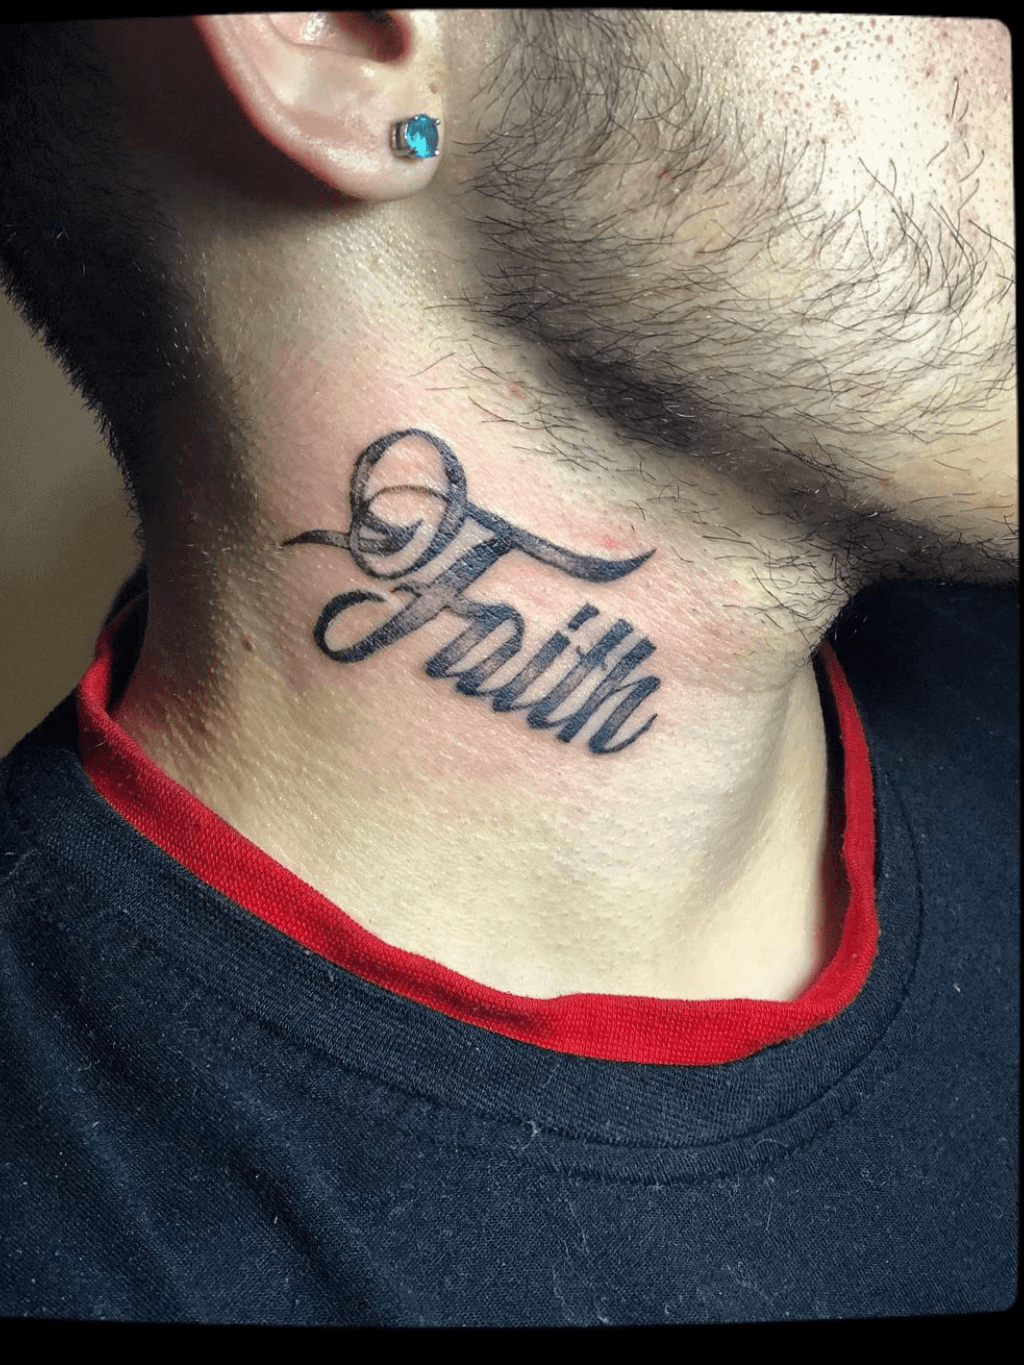 20 Best Religious Tattoos For Men Ideas And Designs 2023  FashionBeans